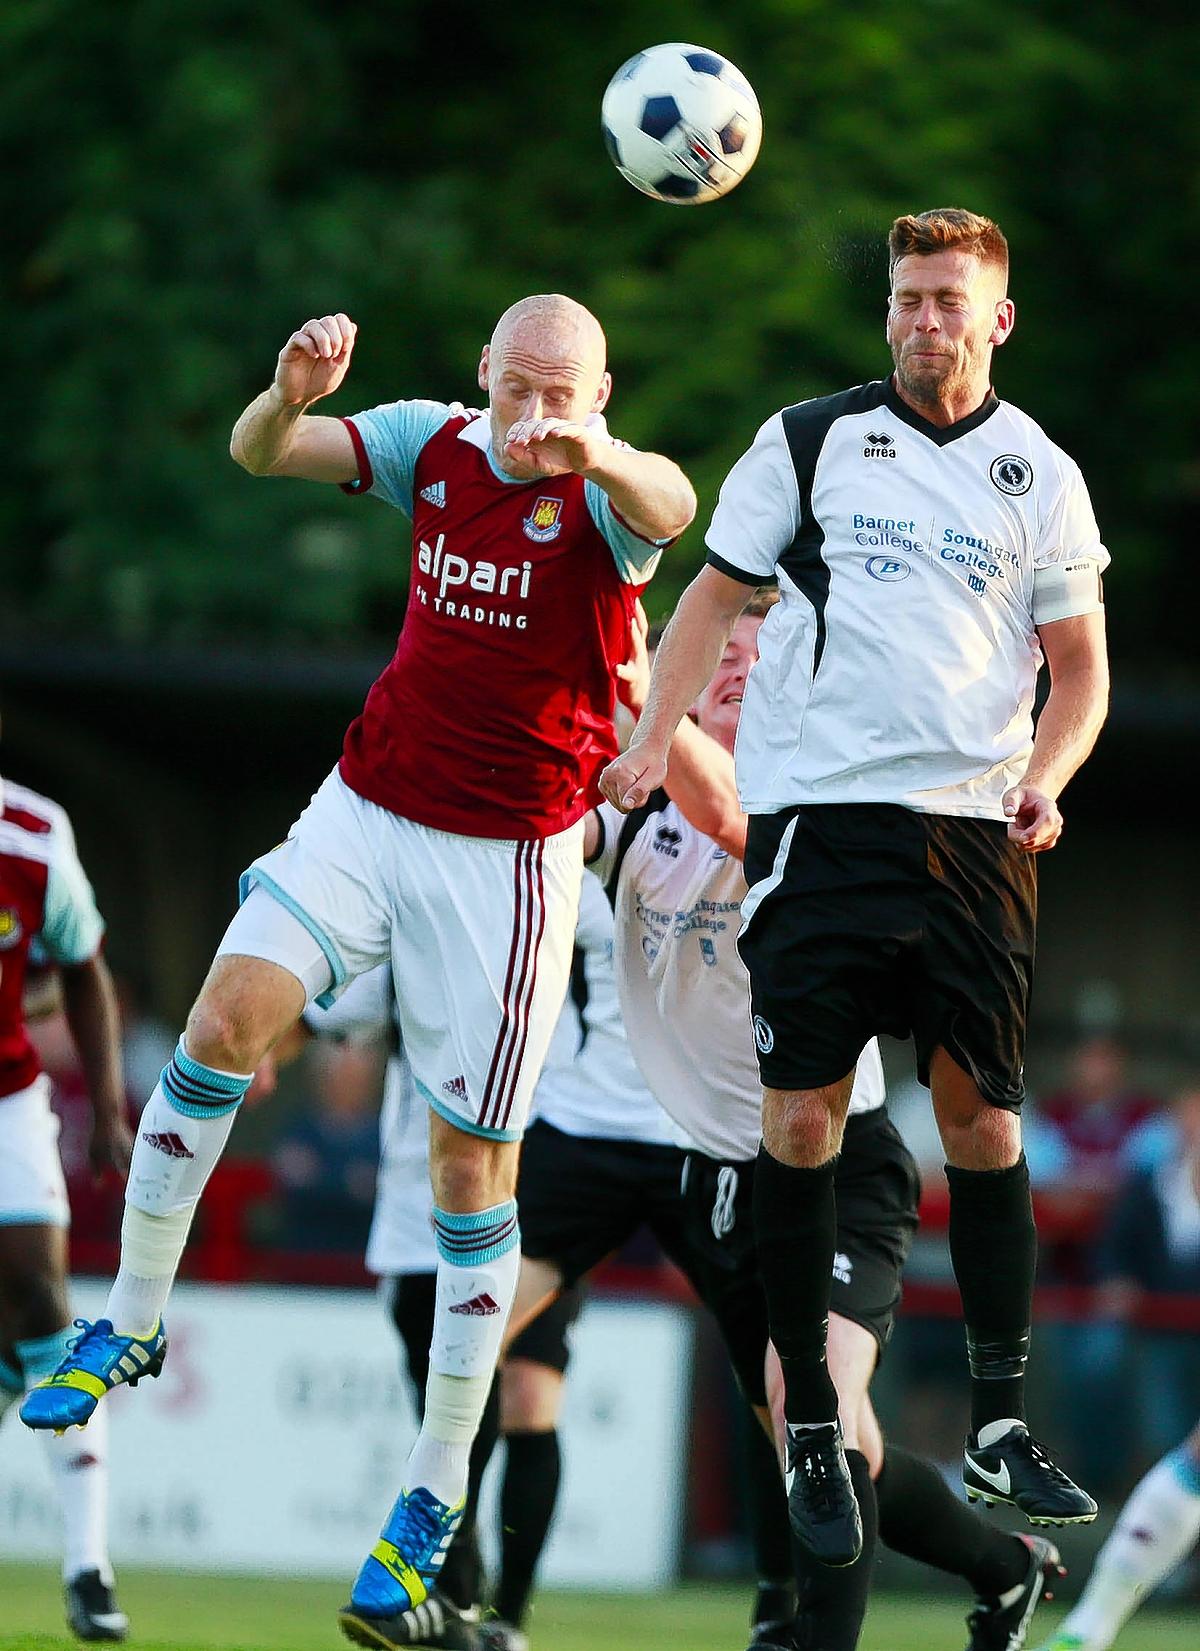 Excellent goalkeeping by Boreham Wood's Mark Russell could not stop West Ham romping to a 3-0 victory as the two sides played their annual pre-season friendly.